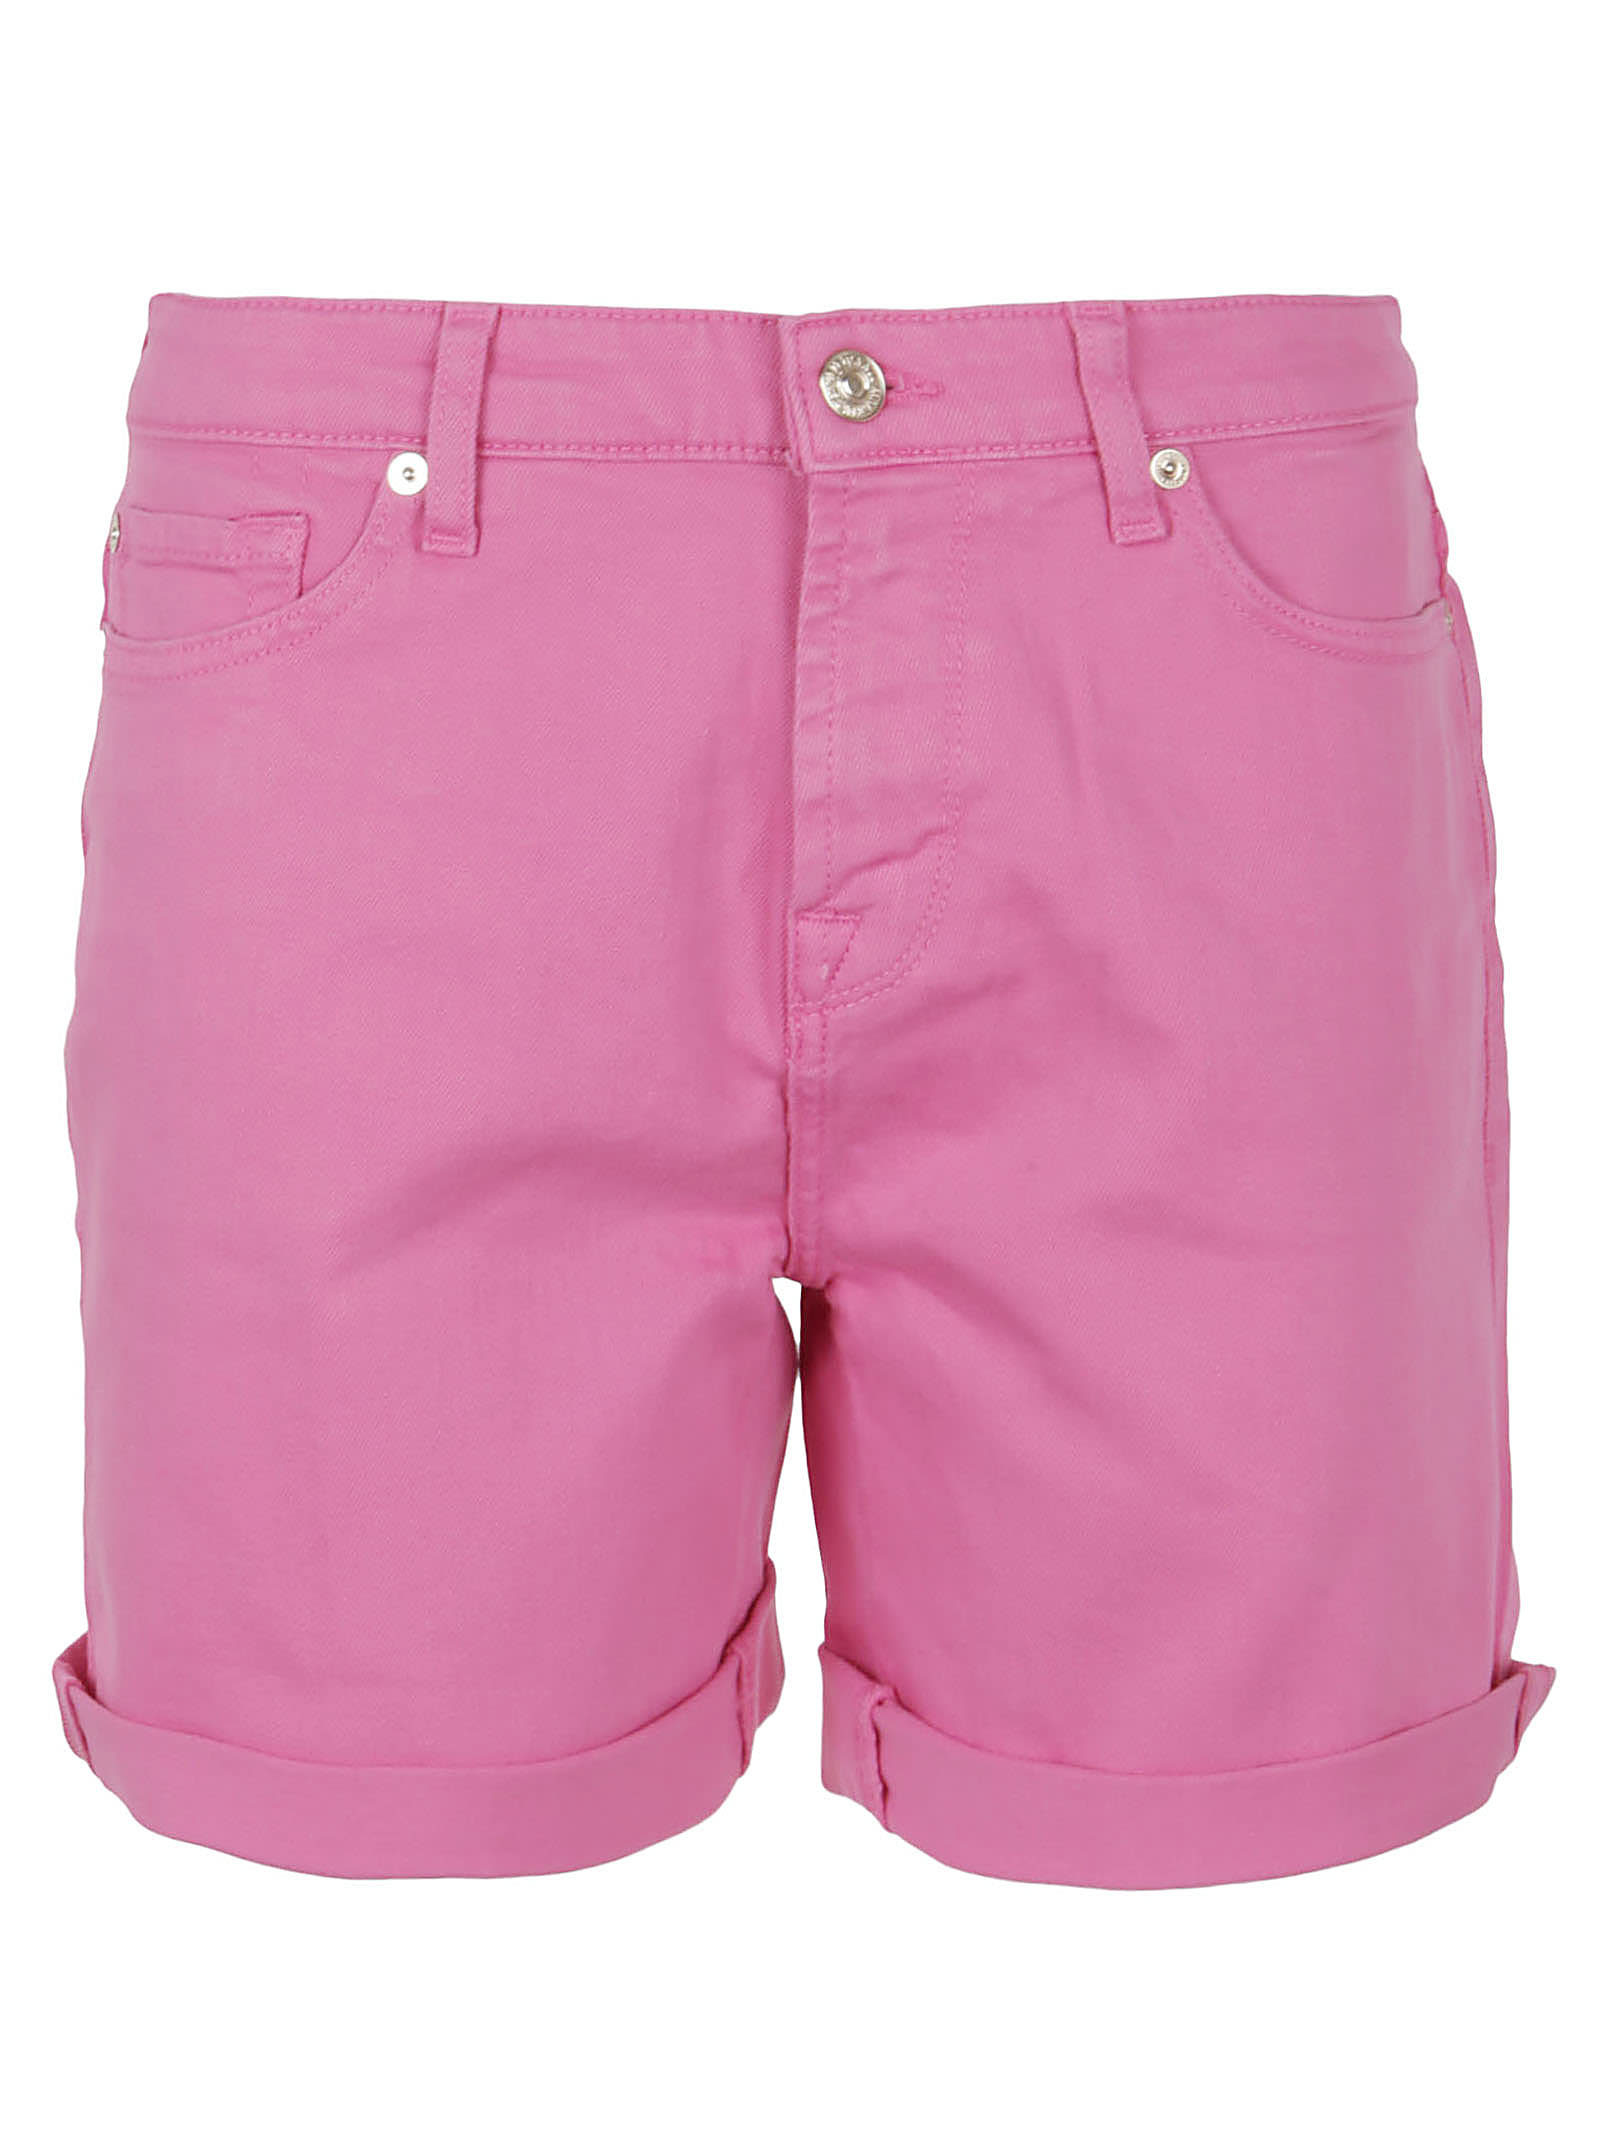 7 For All Mankind Boy Shorts Colored Twill